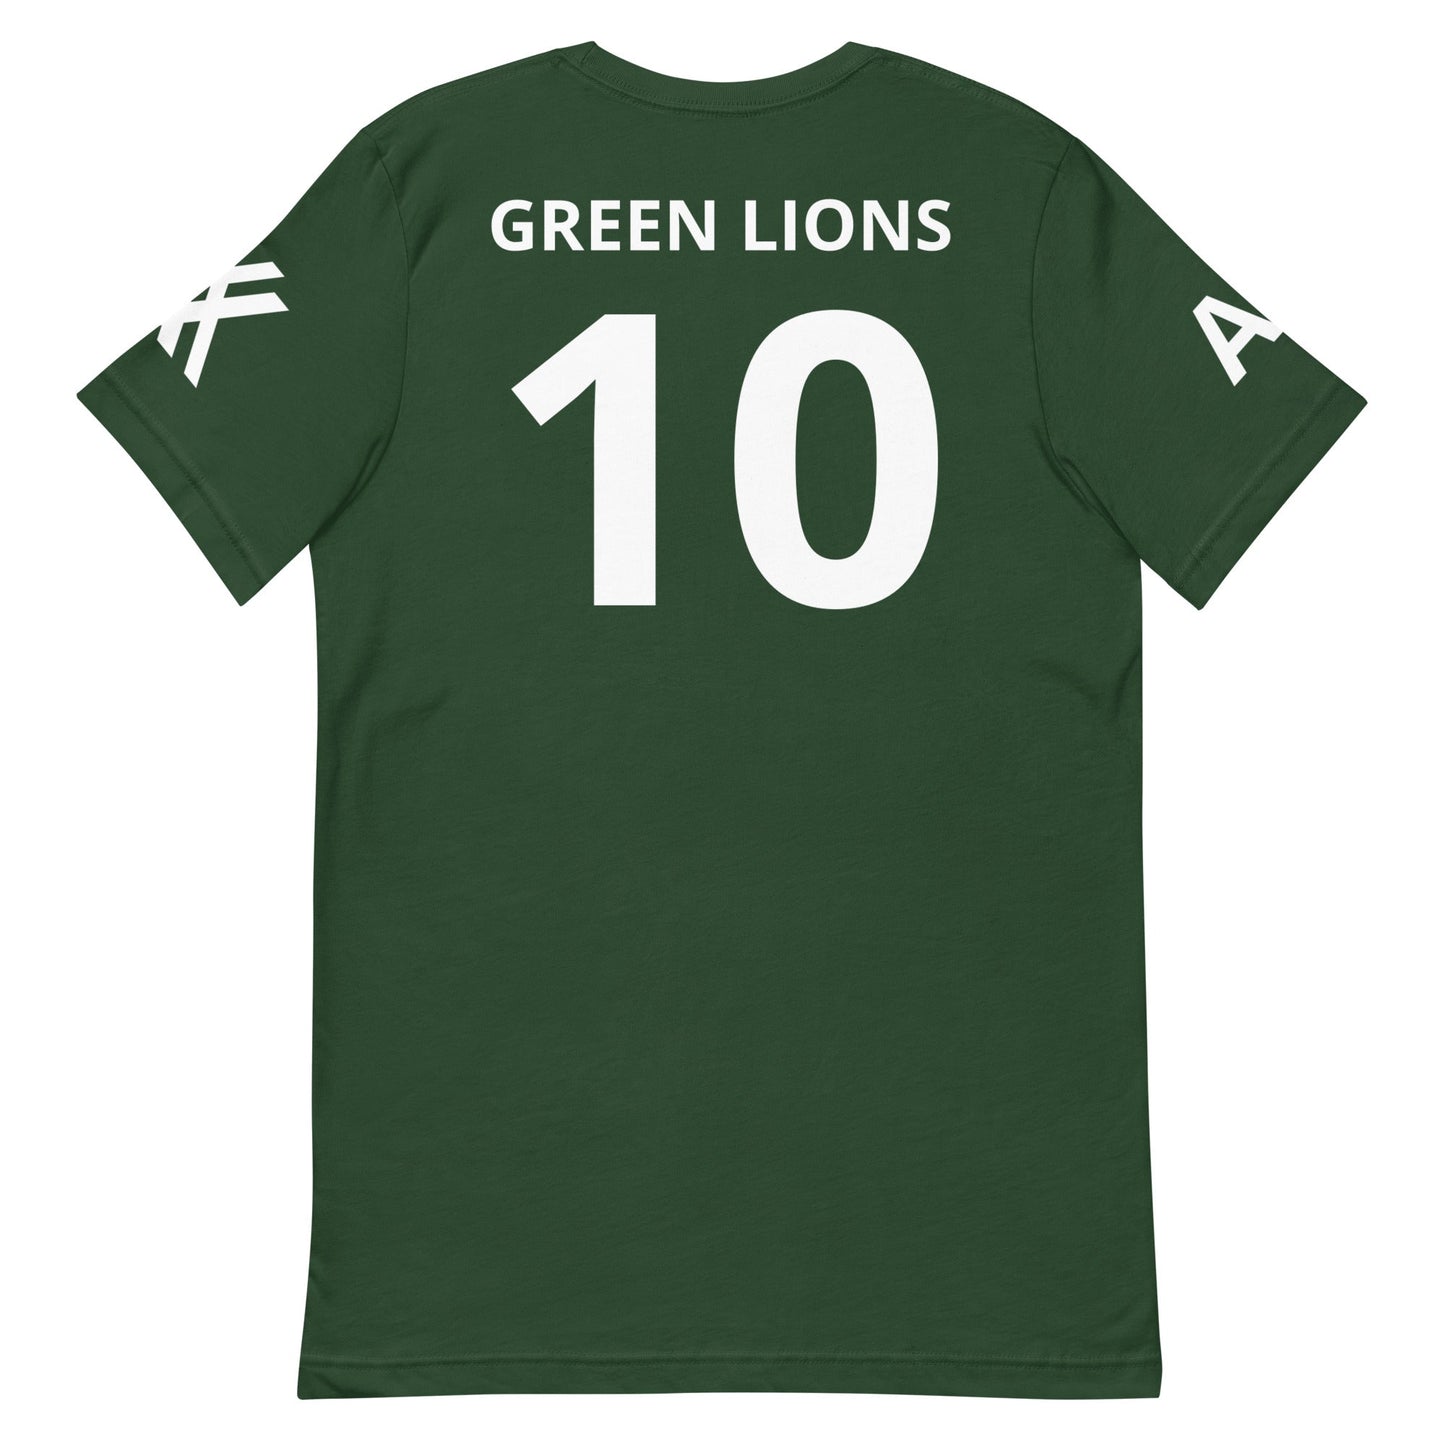 Green Lions Short-Sleeve Unisex T-Shirt with Customized # on Back